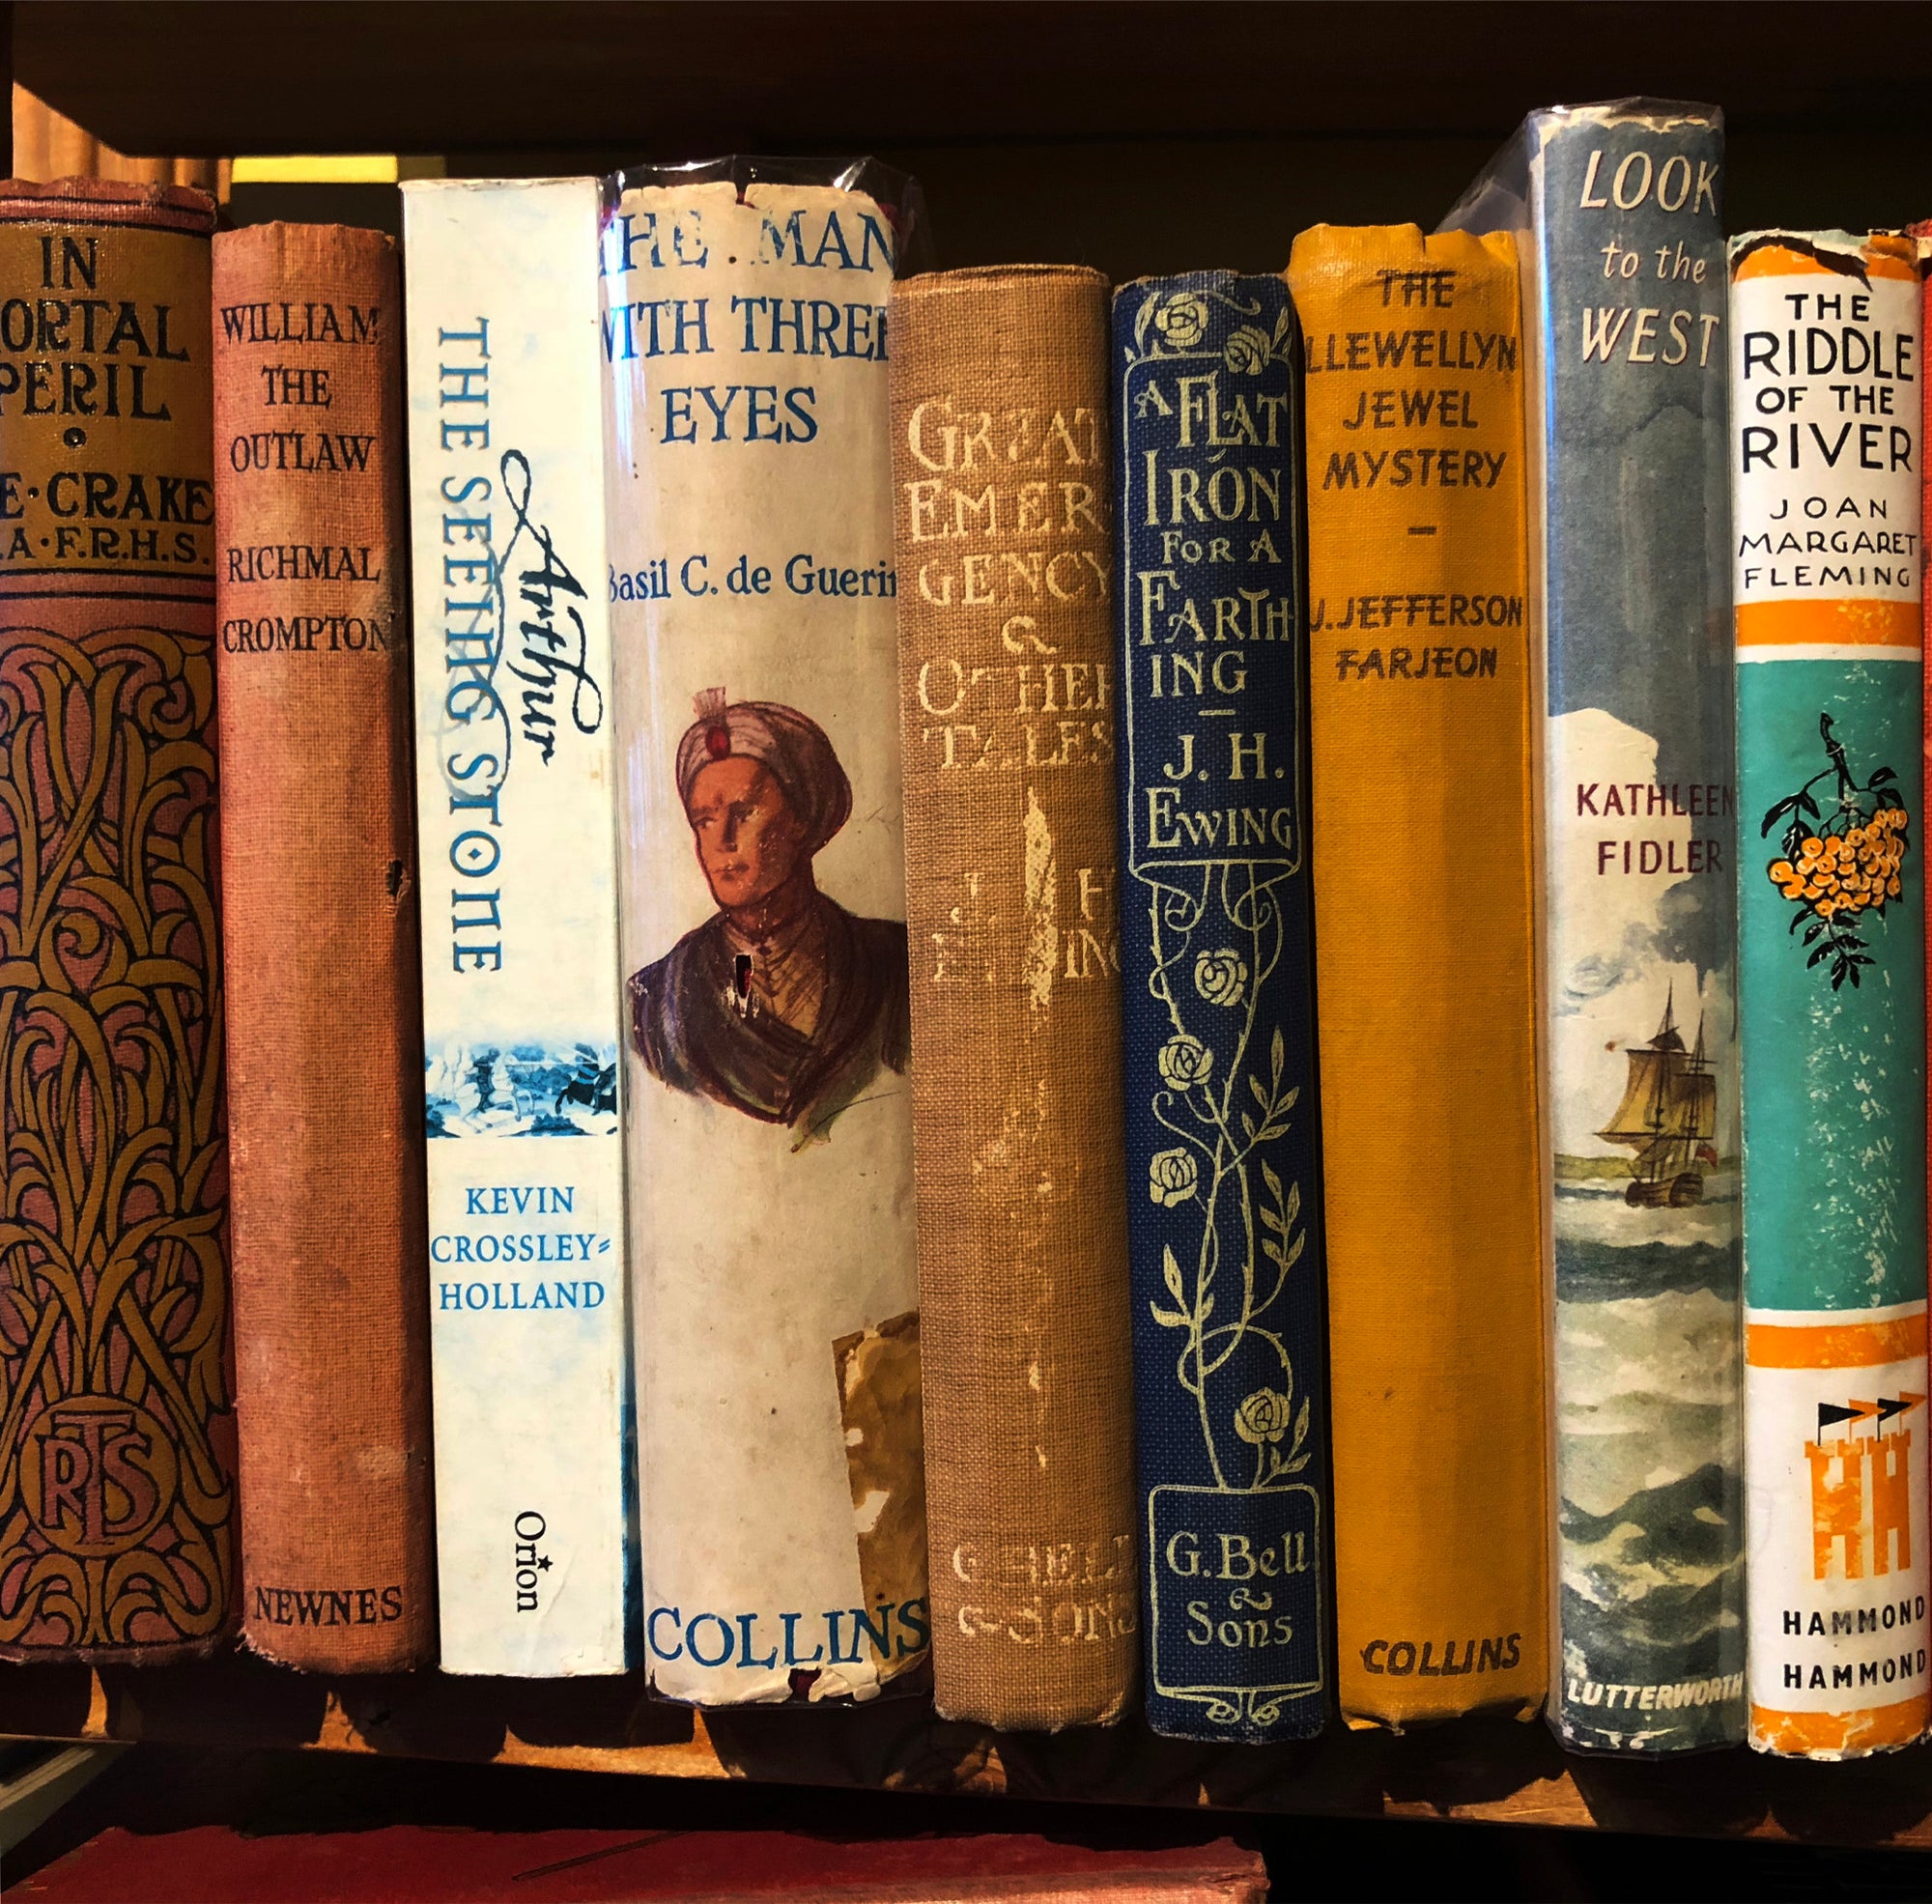 'The Riddle of the River' showcases the well worn spines of vintage books on a shelf, photographed by Richard Heeps in a secondhand bookshop in the Norfolk village Burnham Market.